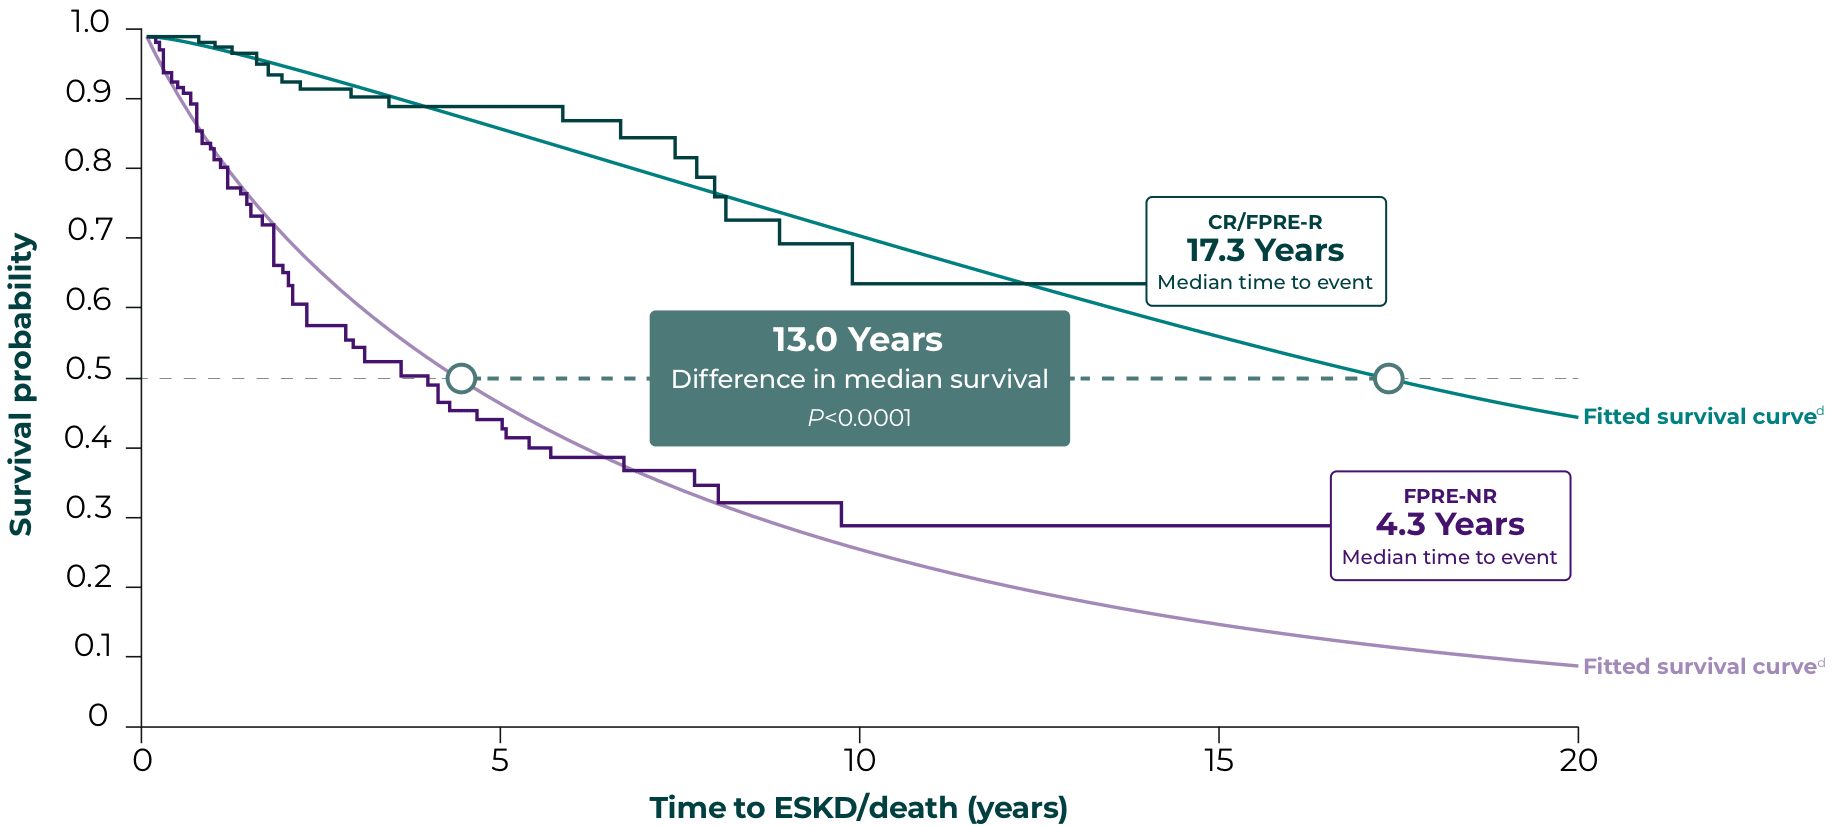 Graph depicts survival data from Saleem 2021 study showing that achievement of complete or partial remission of proteinuria resulted in a 13-year improvement in survival probability